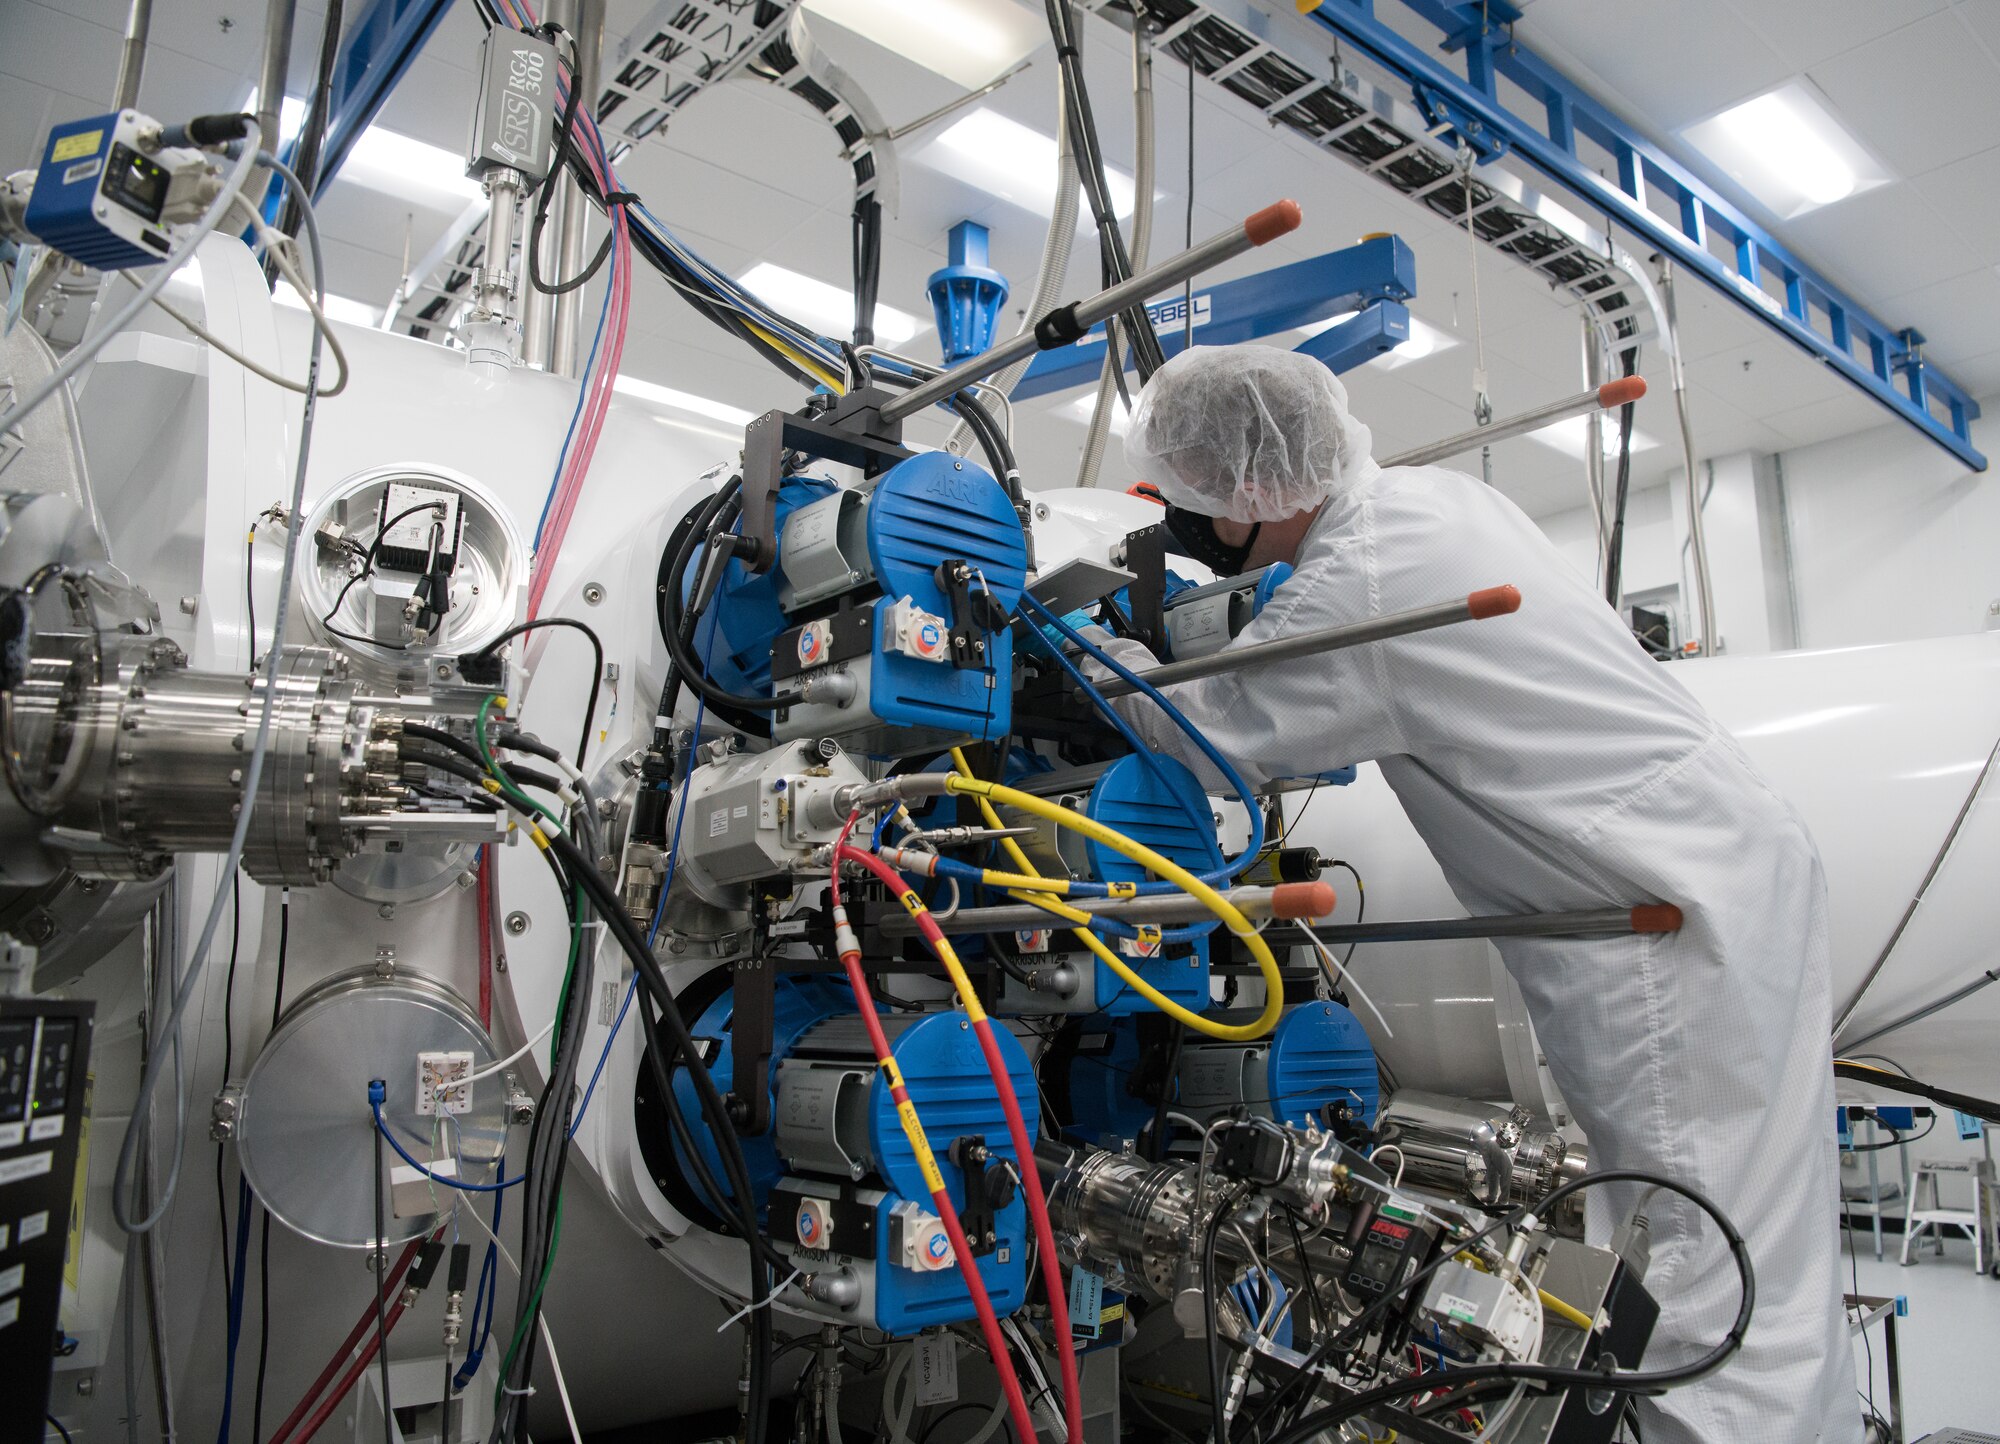 Eric D'Ambro, a test operations engineer, works on a Space Asset Resilience thermal vacuum chamber, Aug. 3, 2020, at Arnold Air Force Base, Tenn. The chamber is used to create the environment of space and then observe its effects on test articles from the environment and hazards produced by the article itself. (U.S. Air Force photo by Jill Pickett)